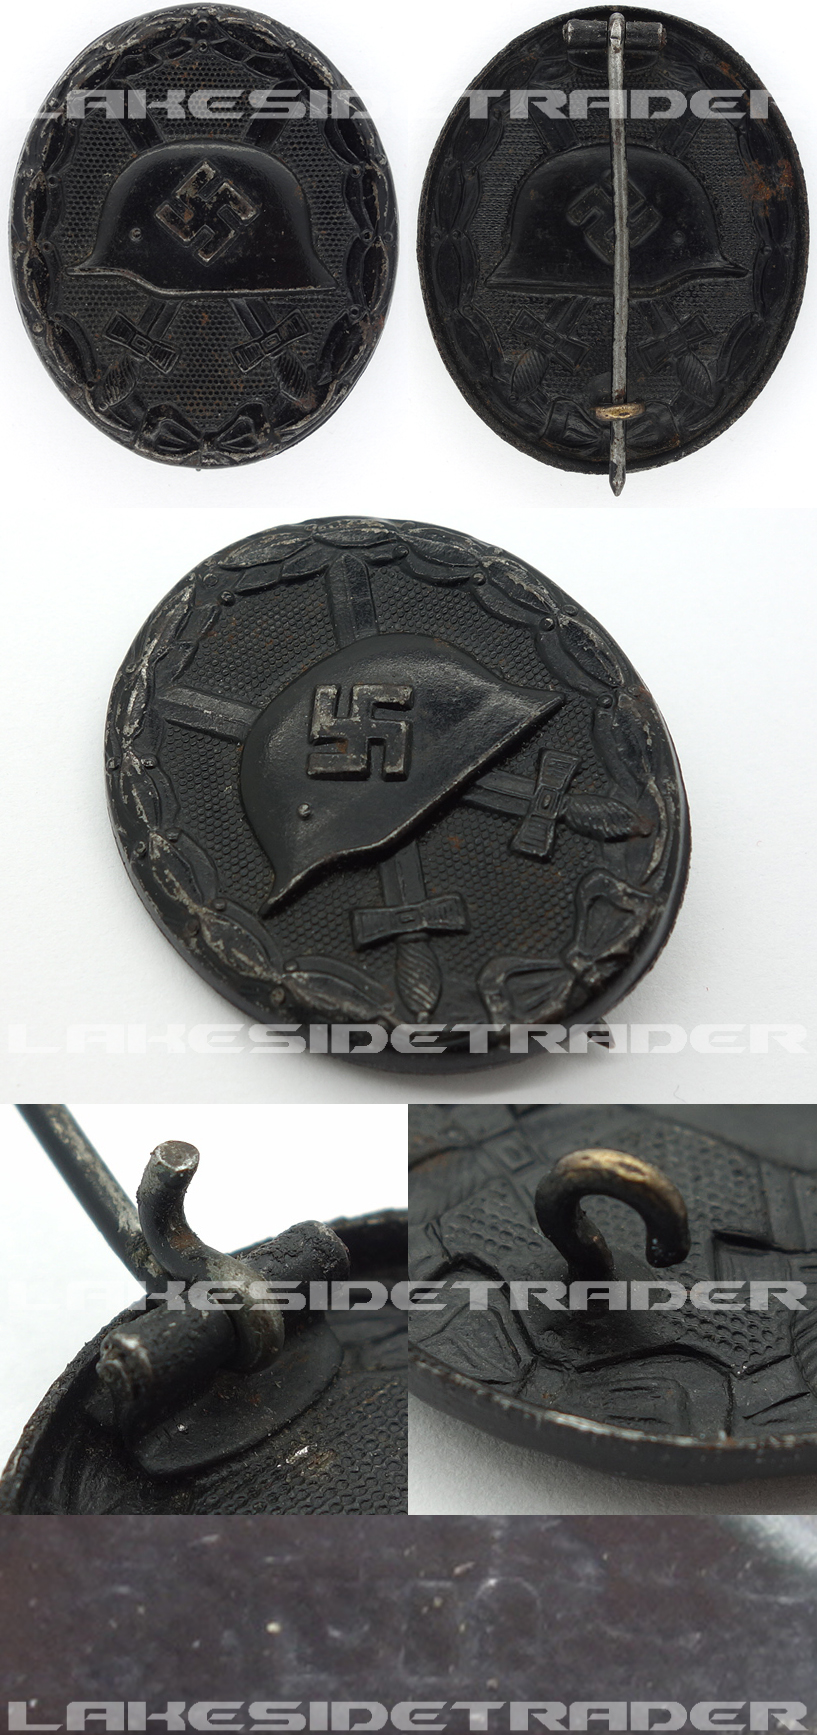 Black Wound Badge by L/53